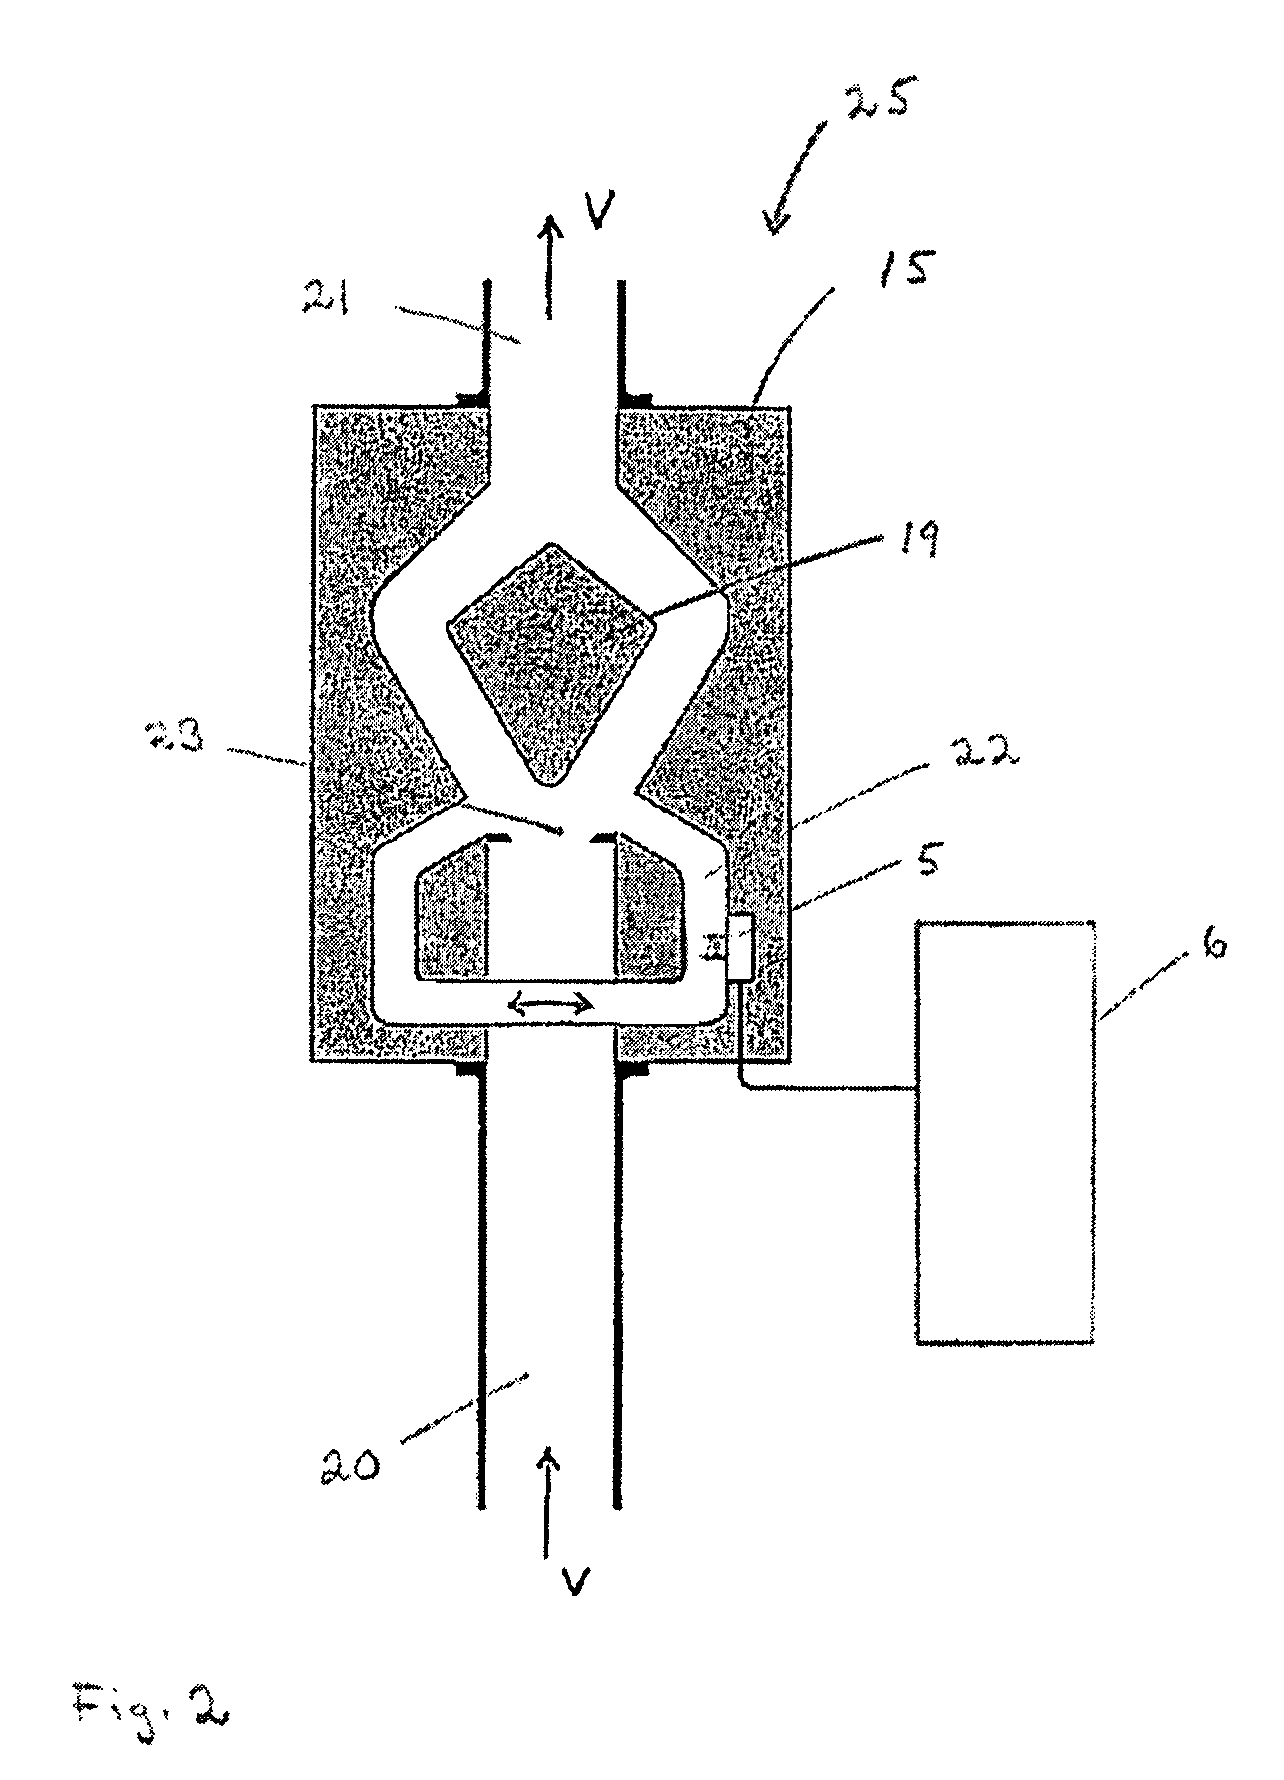 Fuel dispensing unit with on-board refueling vapor recovery detection